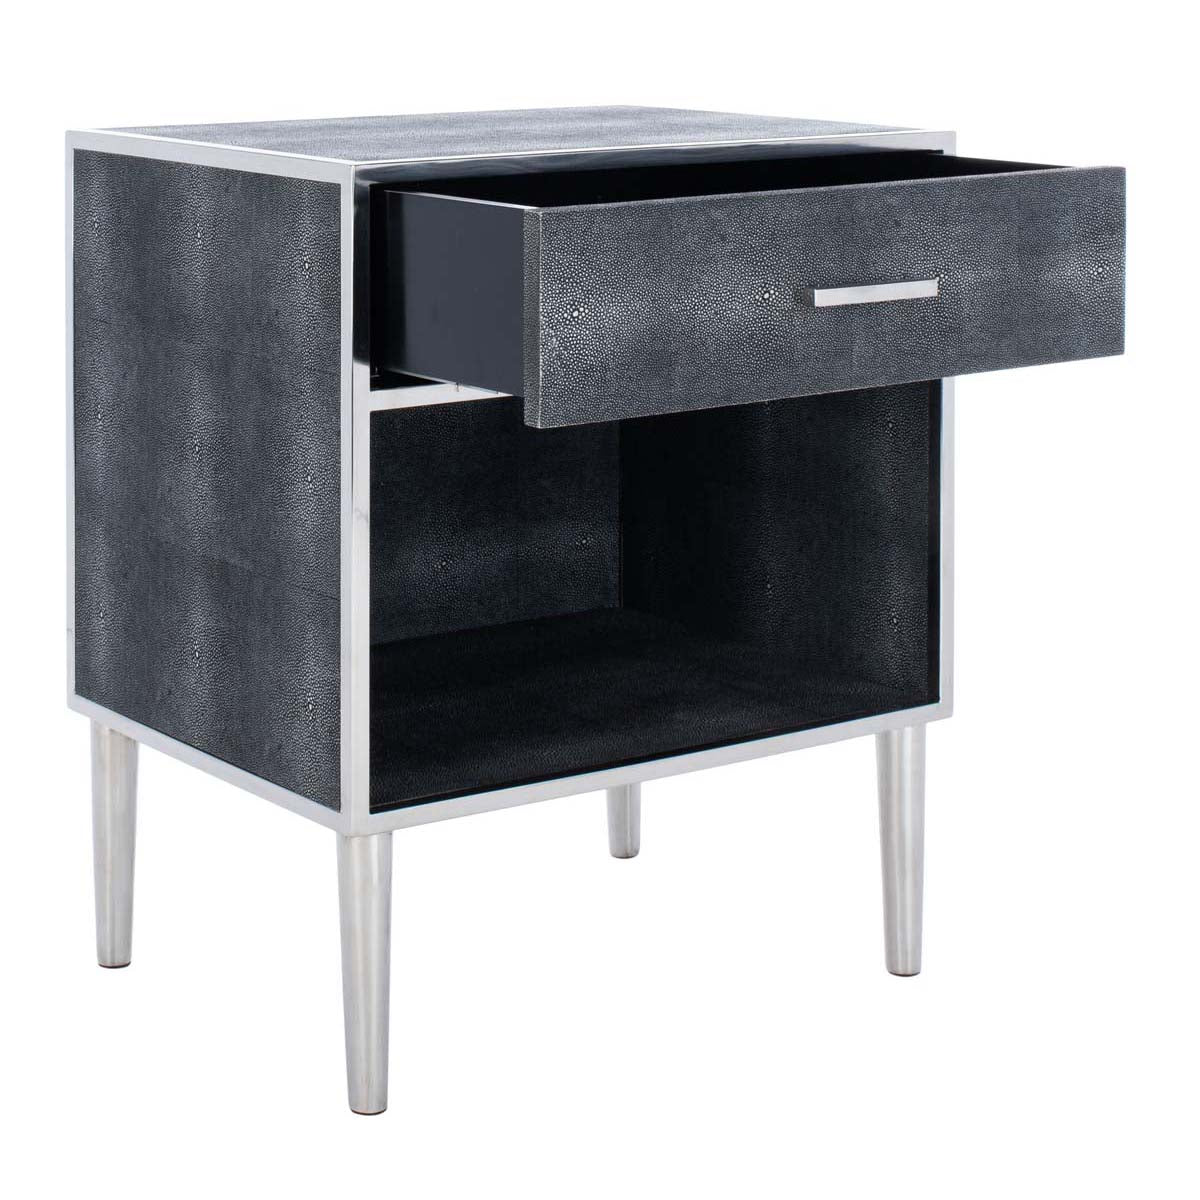 Safavieh Couture Tammy 1 Drawer Faux Shagreen Nightstand - Black / Silver